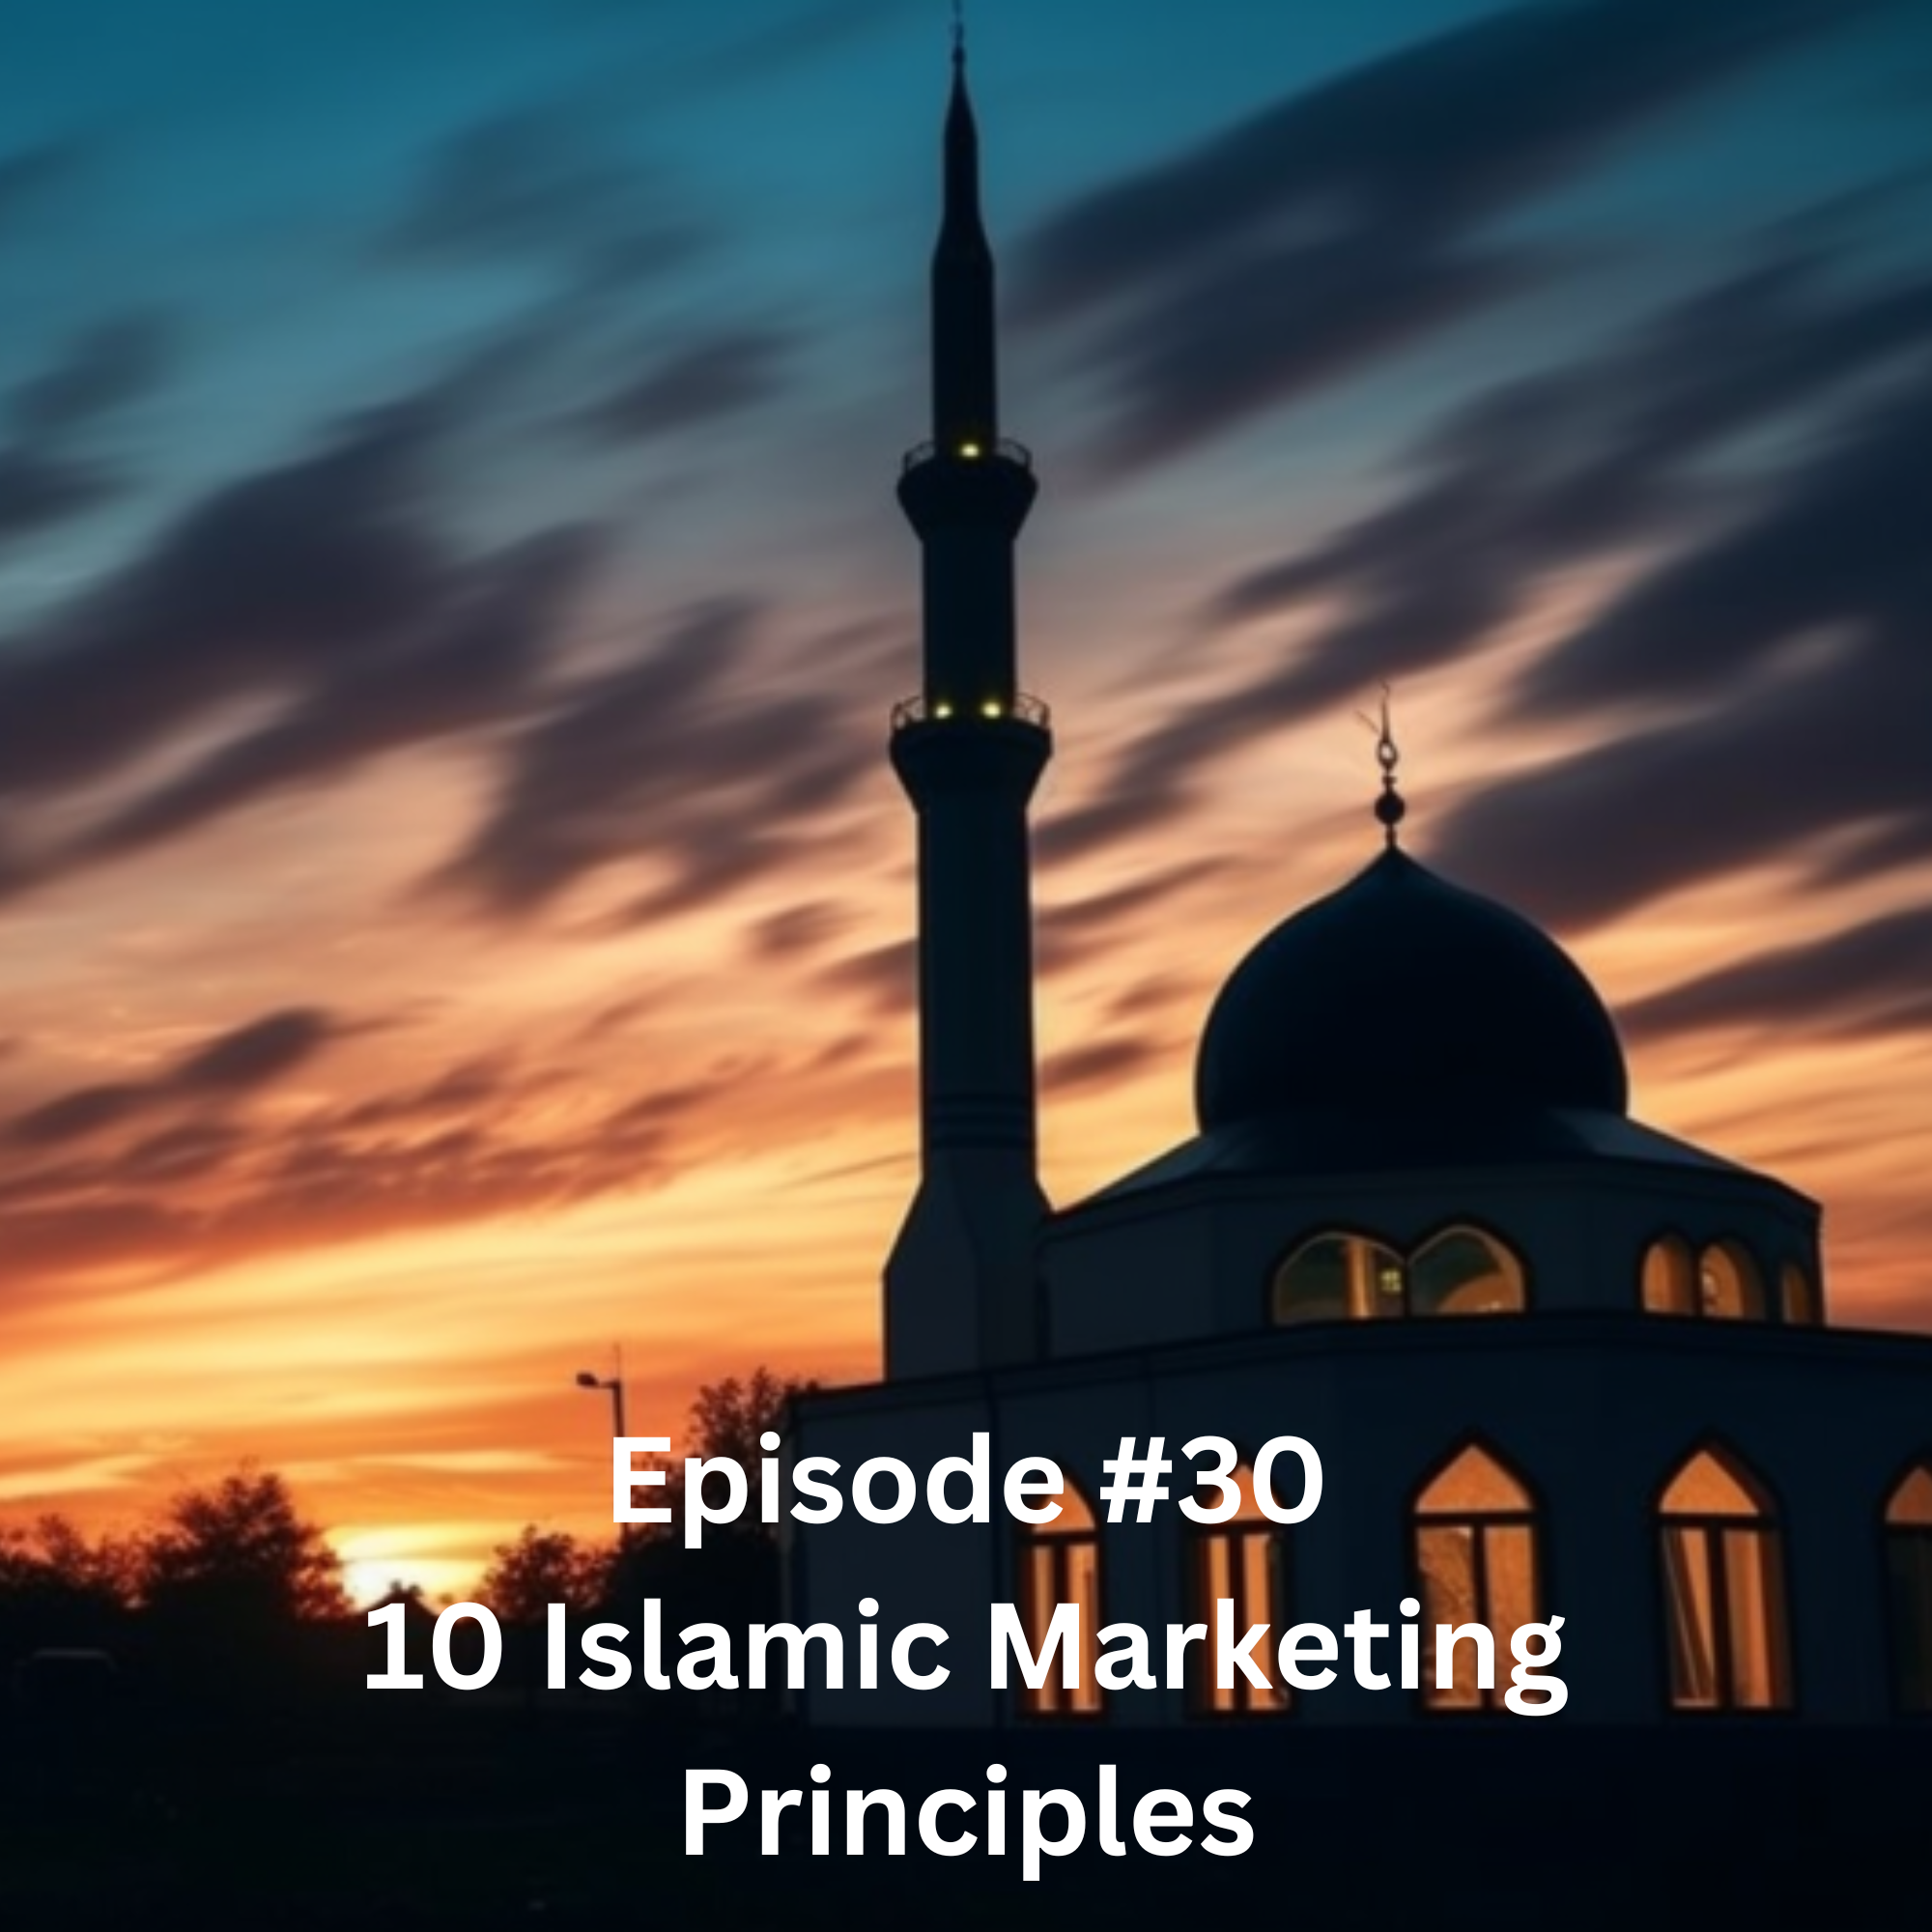 Episode #30 10 Islamic Marketing Principles Every Business Should Know